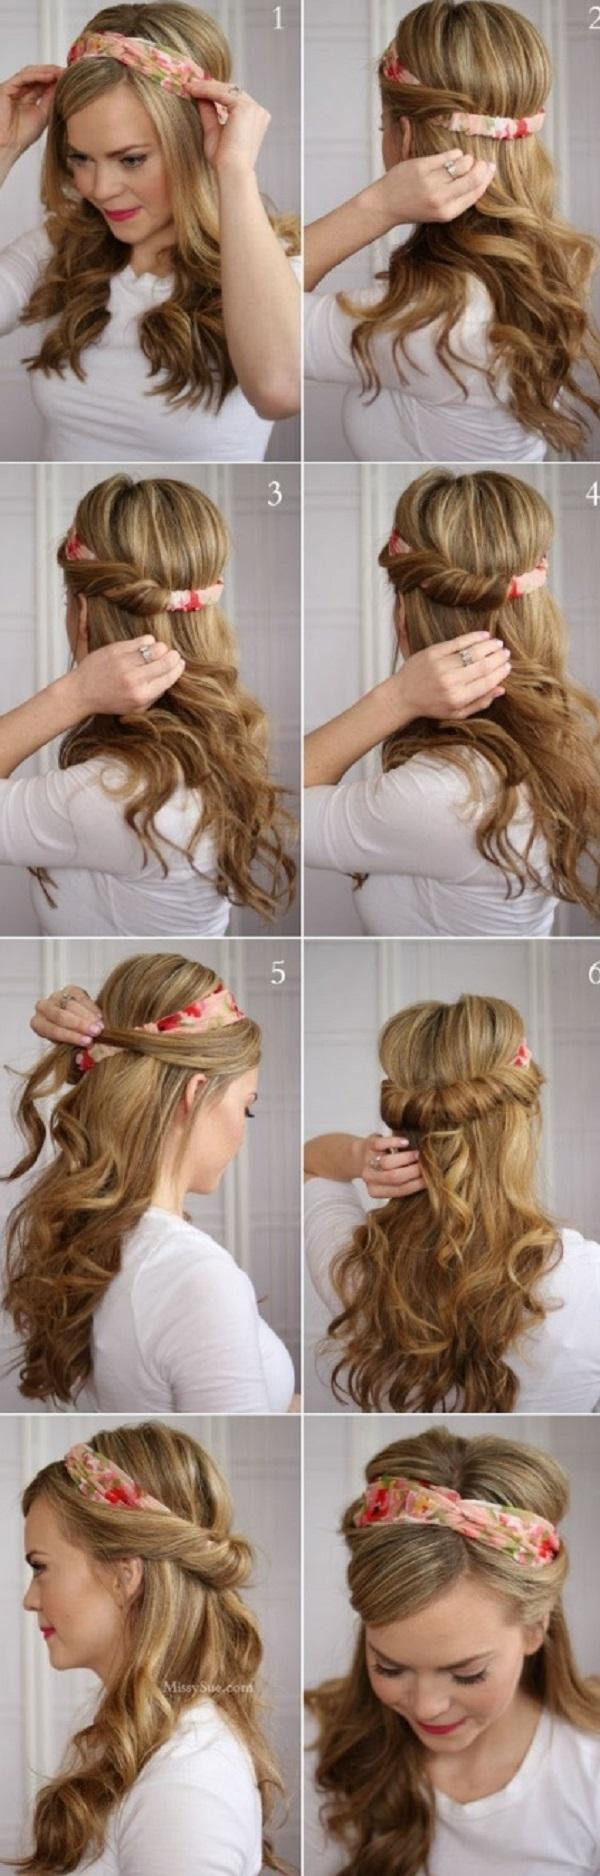 Cute Easy Hairstyles For Long Hair
 25 Easy Hairstyles for long hair